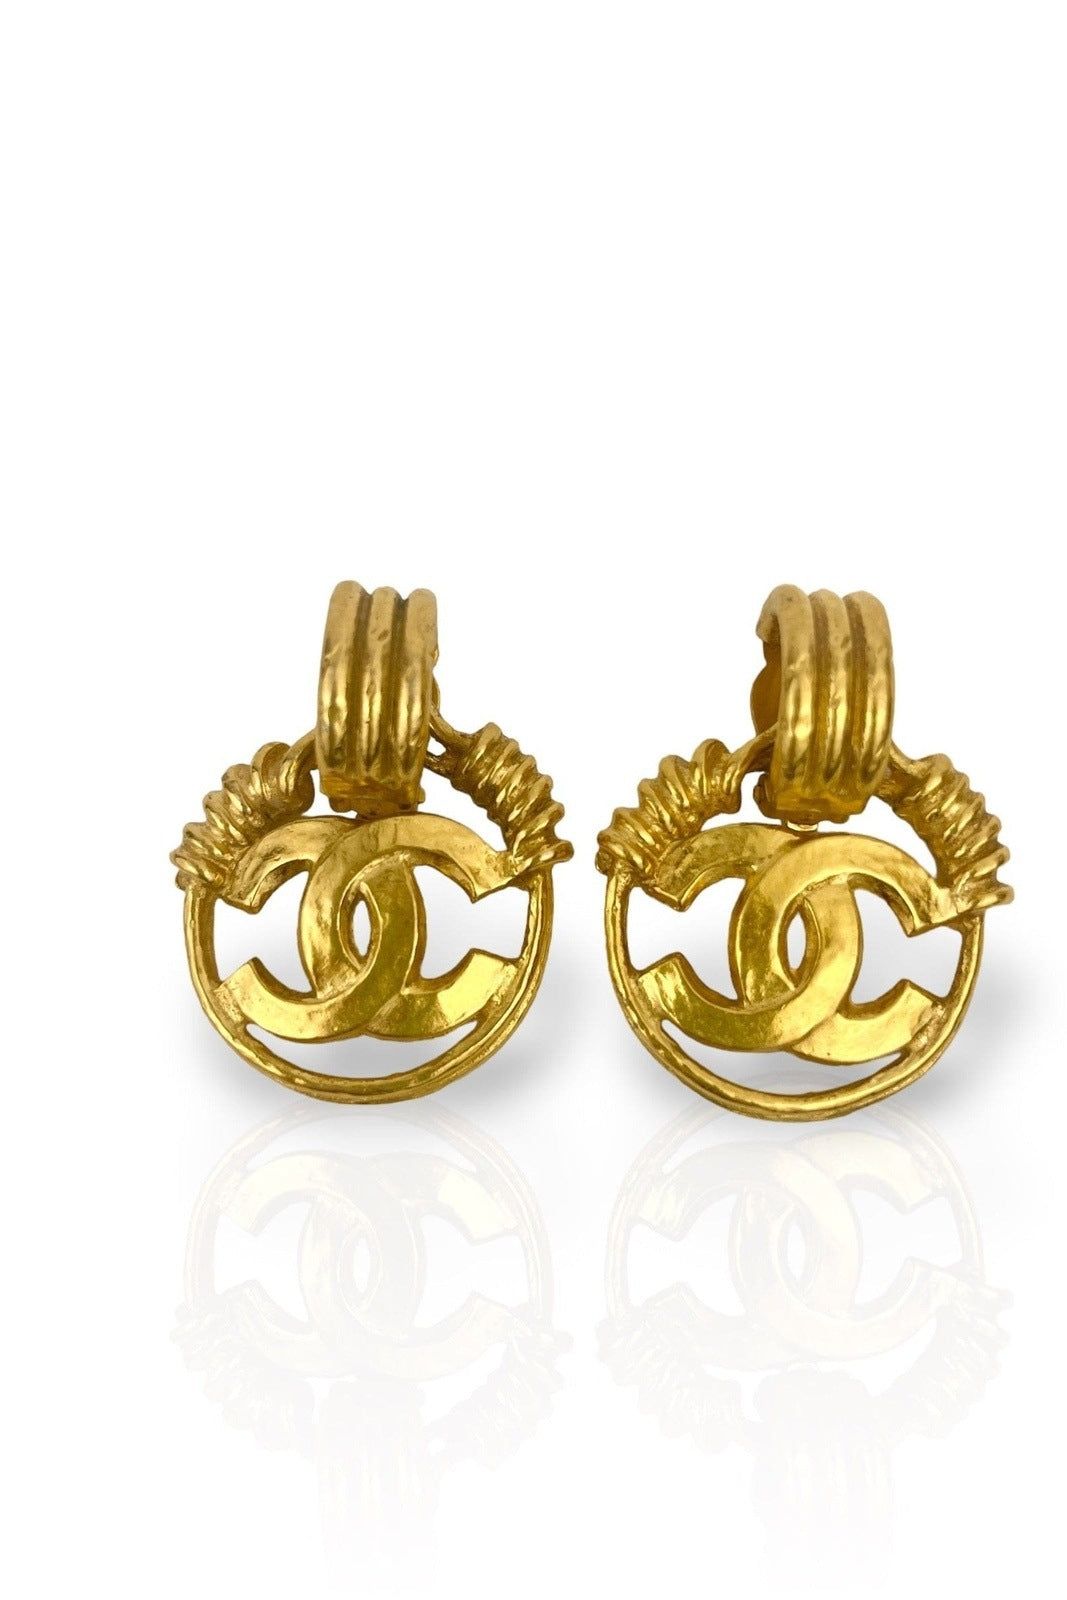 Chanel Vintage Faux Pearl and Goldtone CC Medallion Drop Earrings